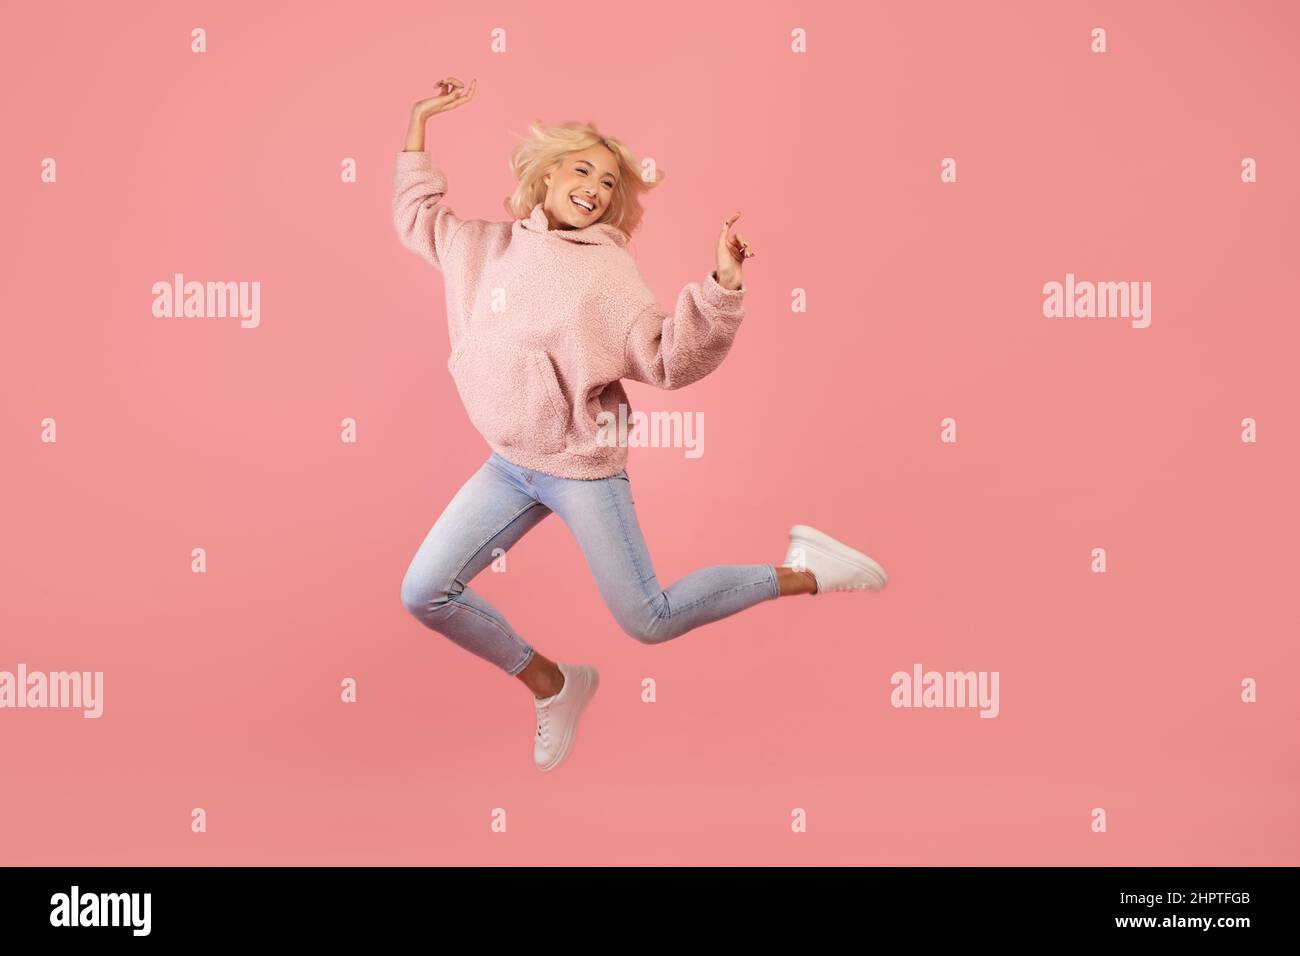 Successful moment. Excited young lady jumping and having fun, being in good mood, celebrating triumph, pink background Stock Photo